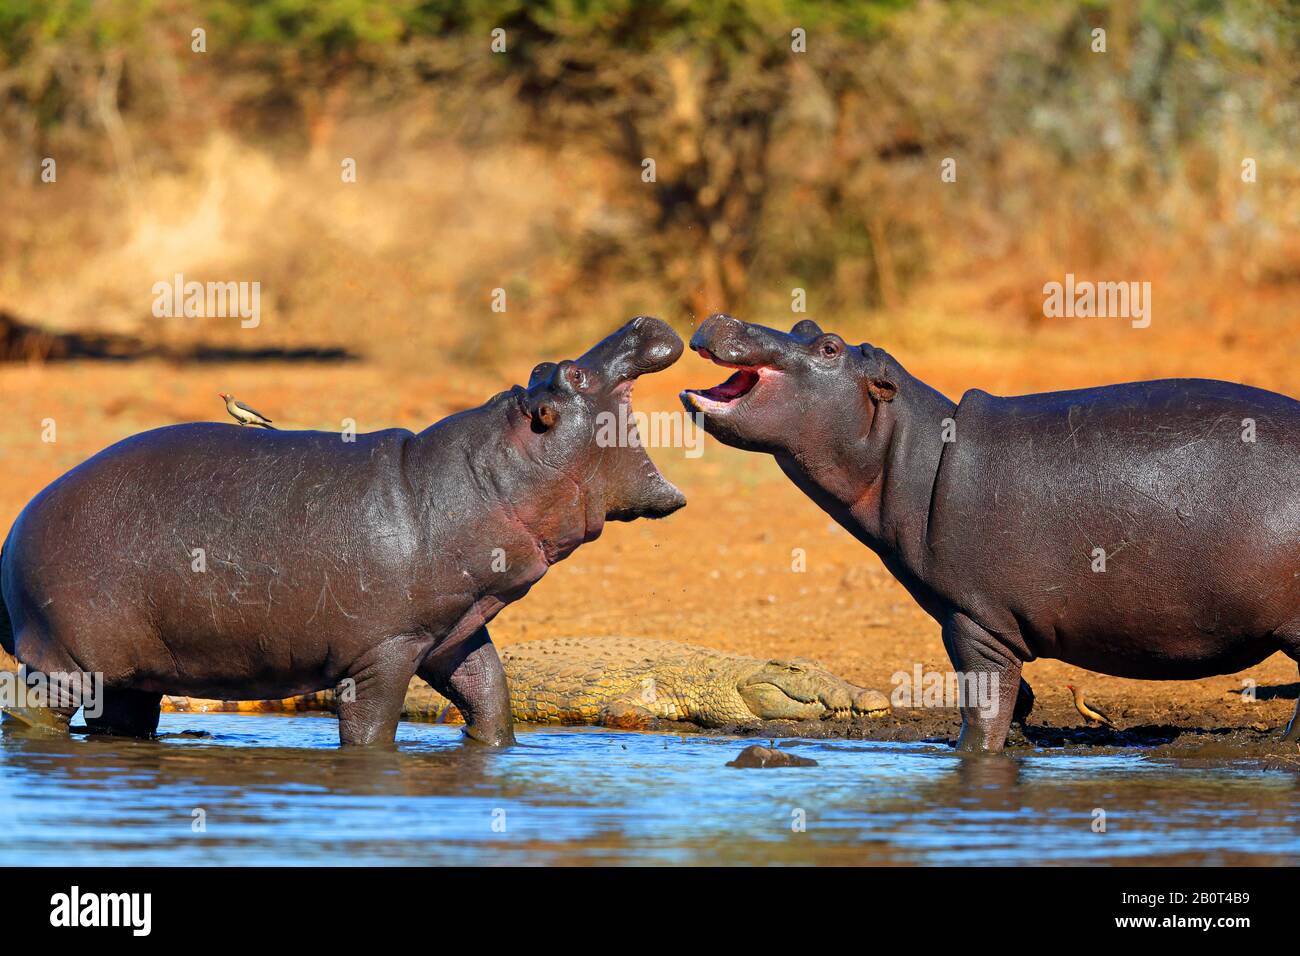 hippopotamus, hippo, Common hippopotamus (Hippopotamus amphibius), two conflicting hippos in shallow water, crocodile at the shore, South Africa, Lowveld, Krueger National Park, Sunset Dam Stock Photo